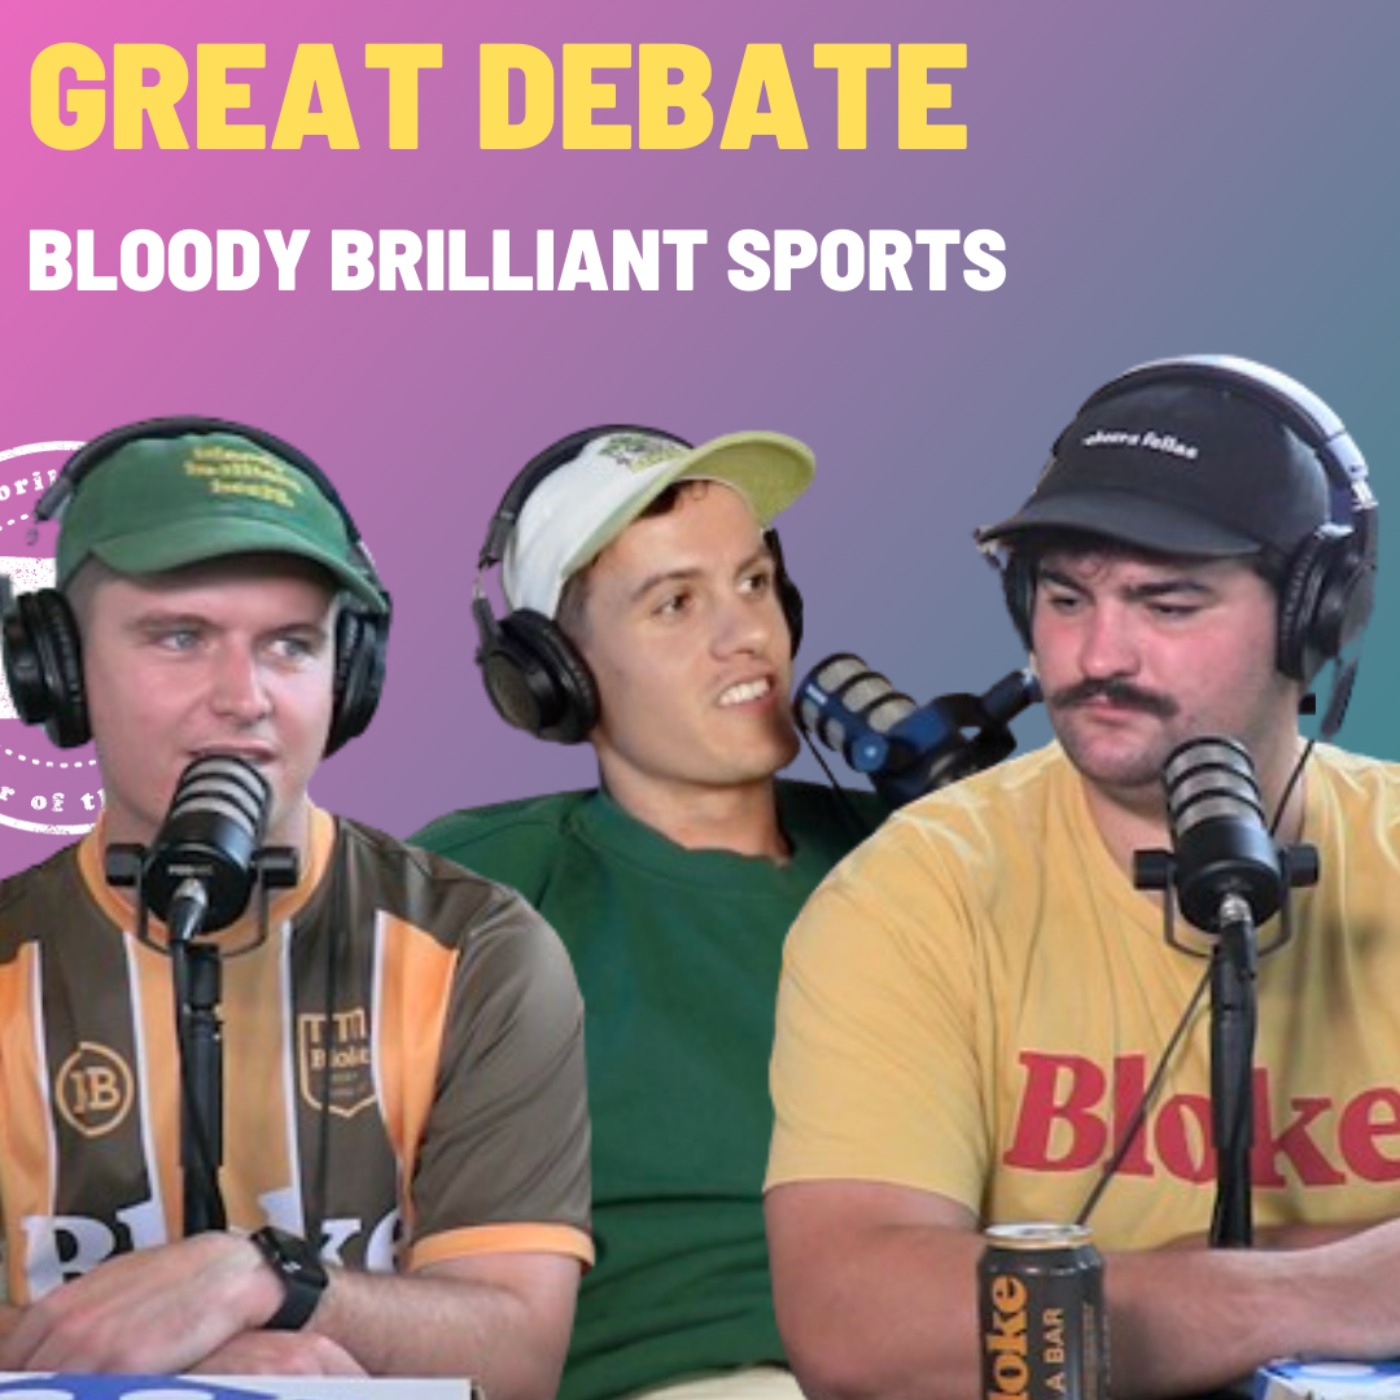 The Great Debate - Bloody Brilliant Sports